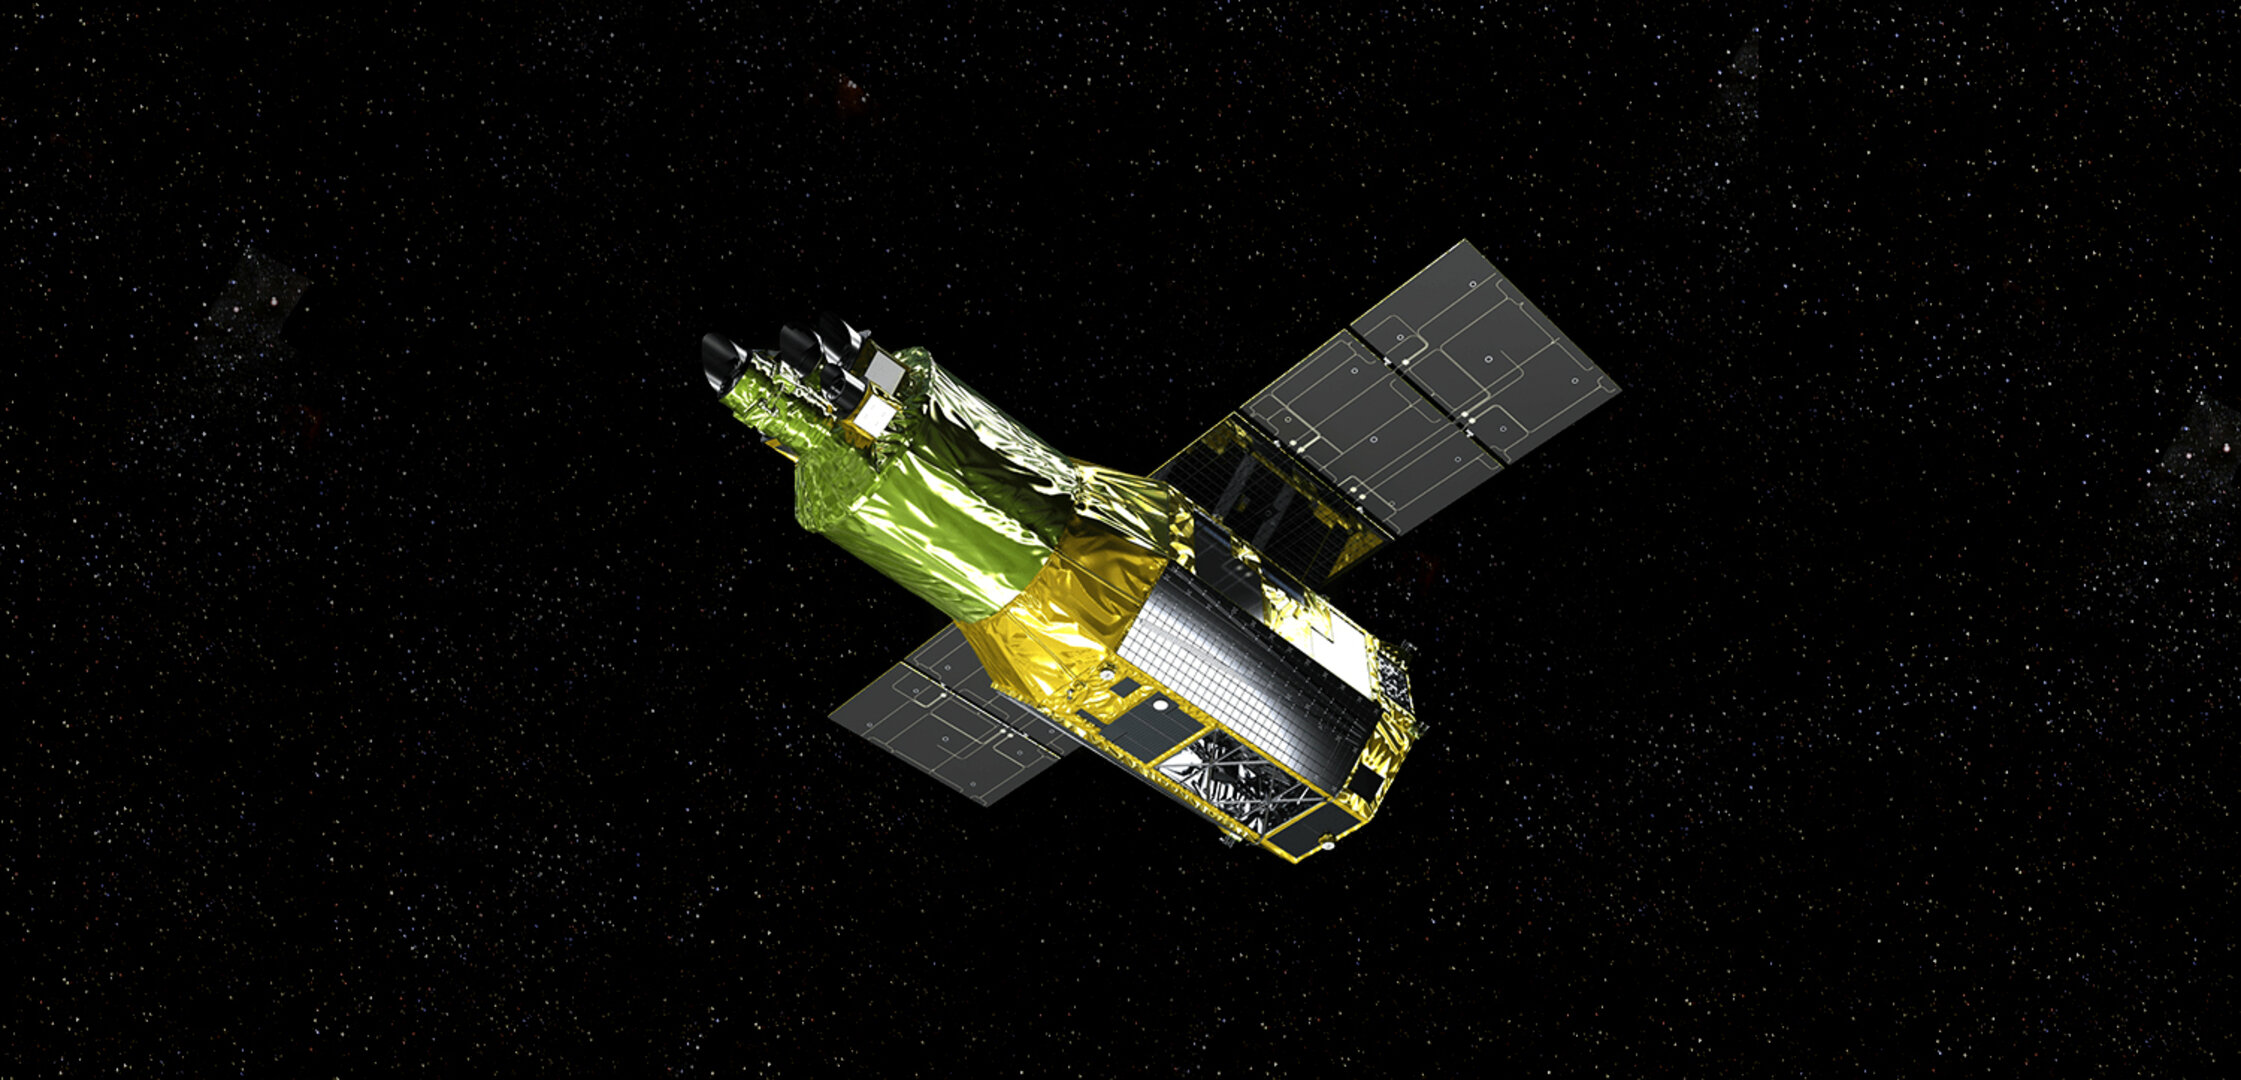 XRISM – X-Ray Imaging and Spectroscopy Mission